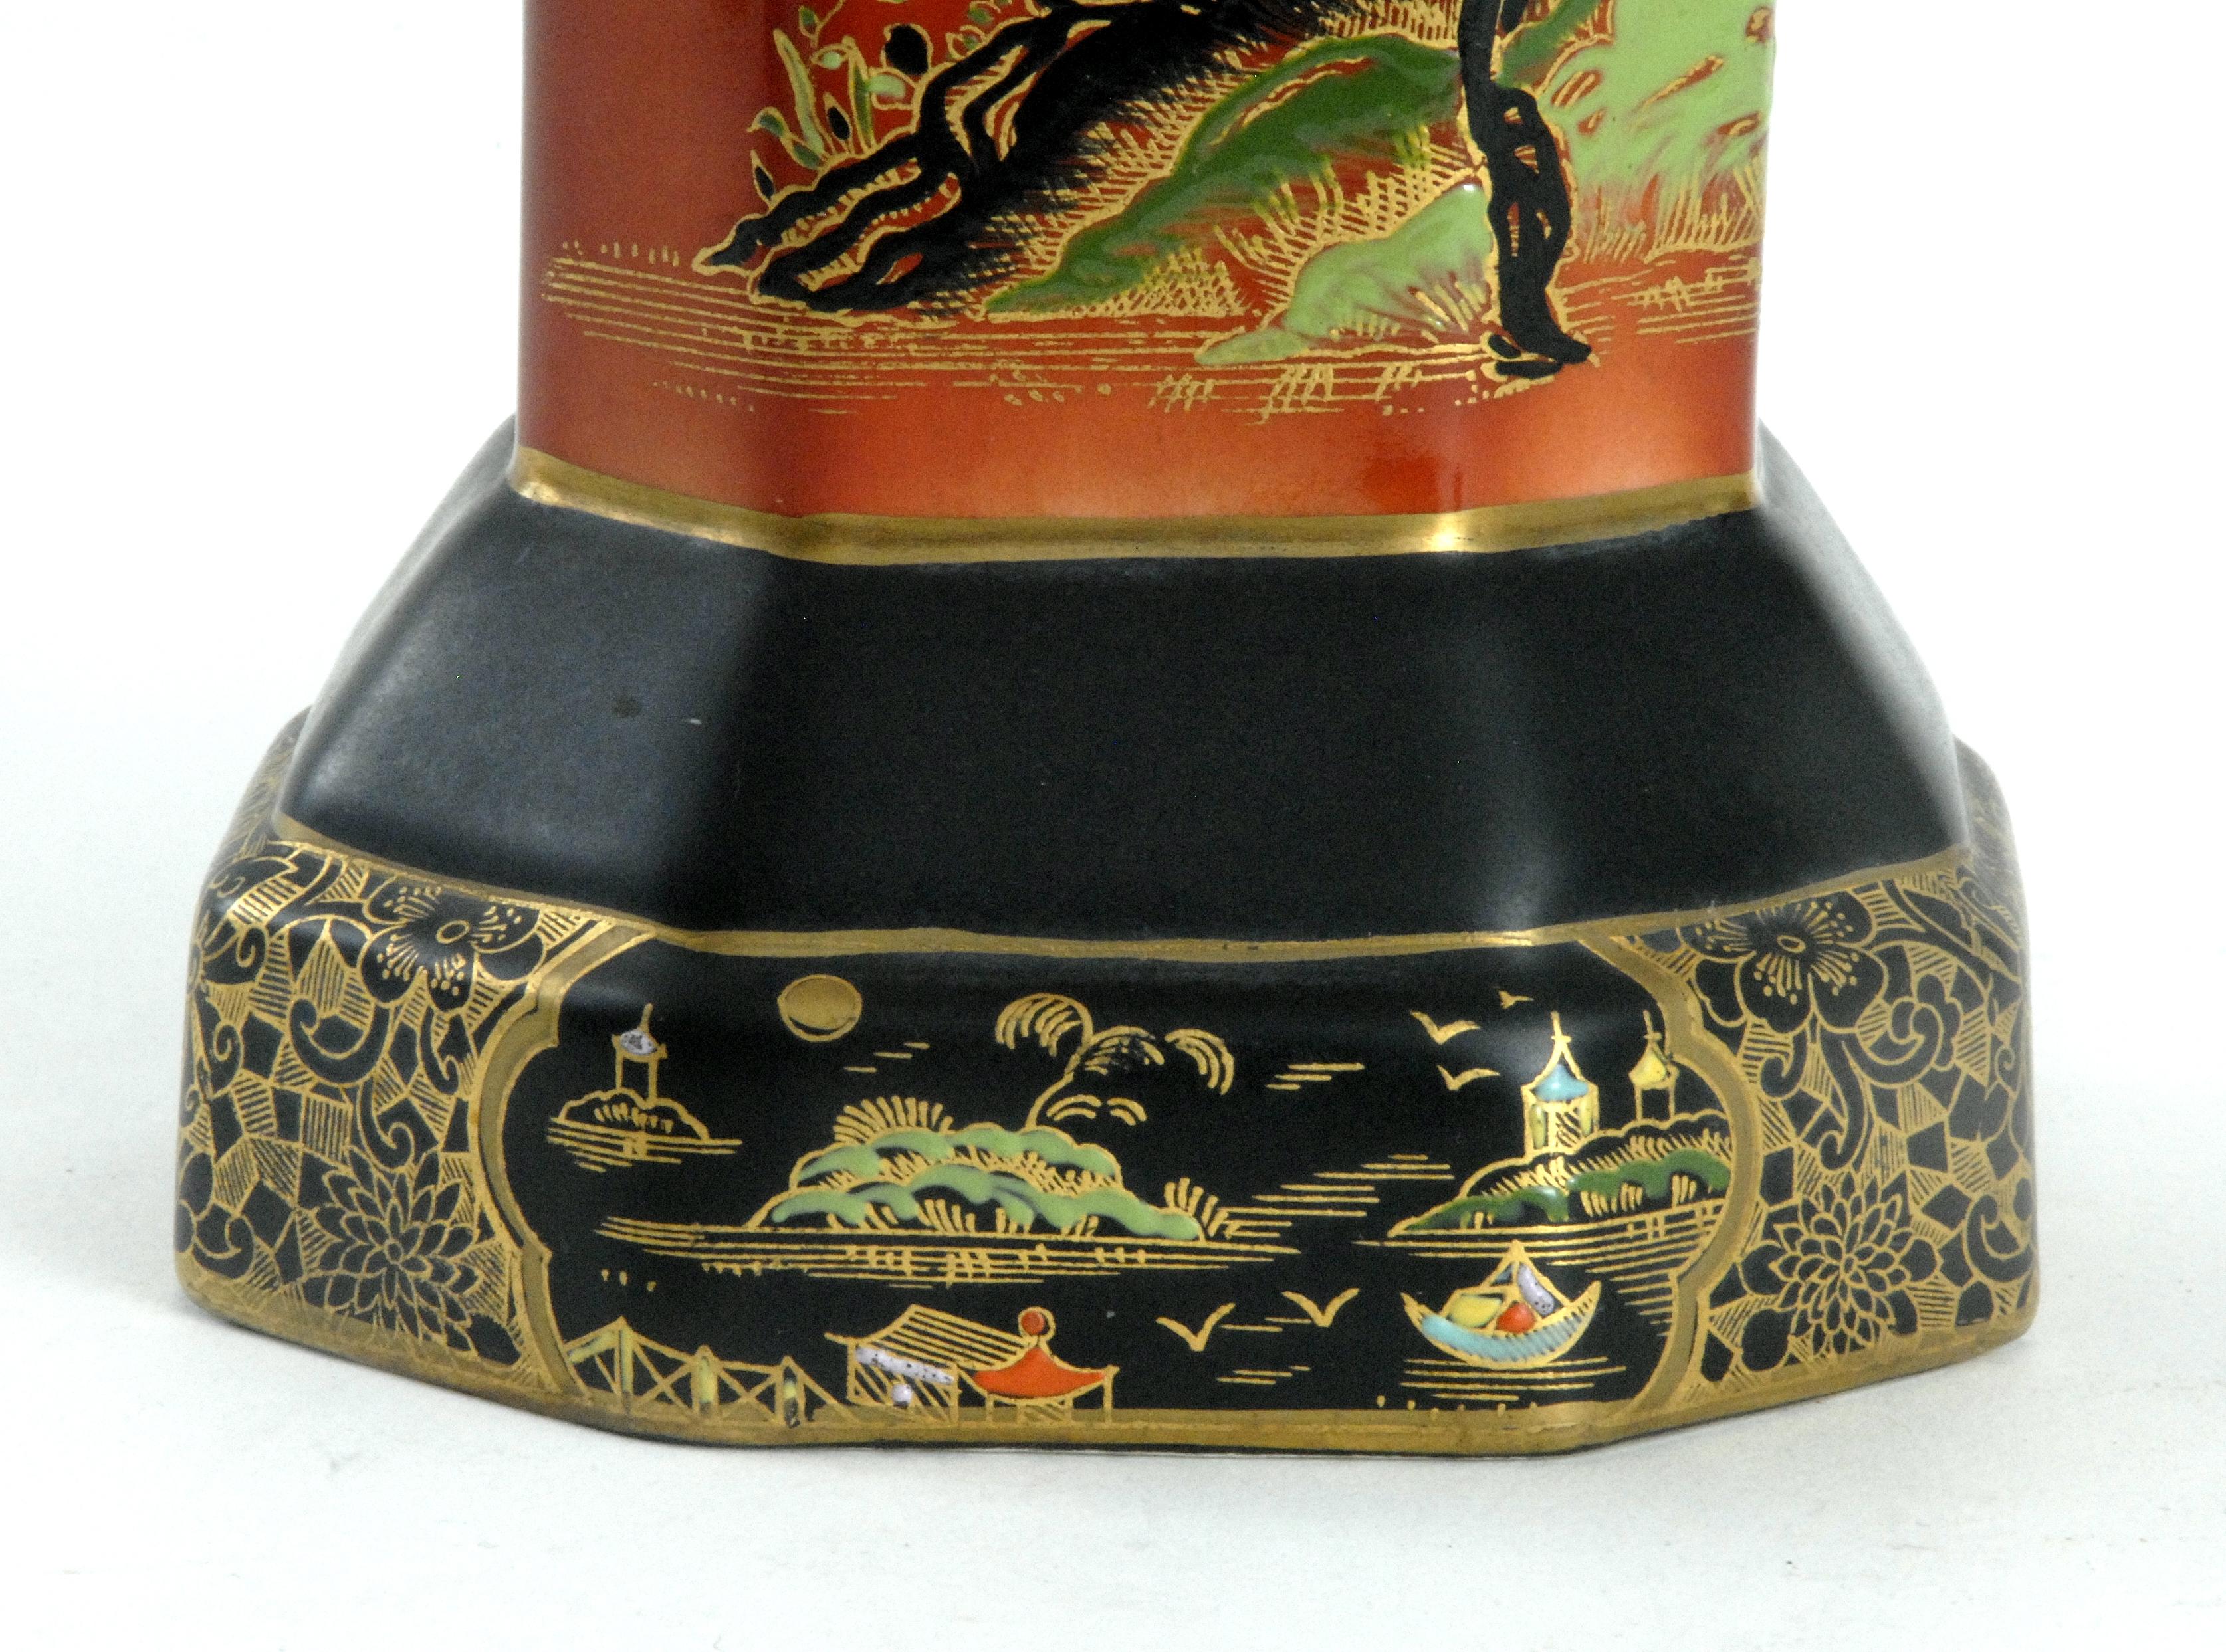 A superbly hand decorated 'Temple' pattern vase from circa 1925 in near perfect condition having been in only the one collection since purchase in the 1930s. Oriental scene of figures in temple with large circular doorway. Ornate trees with black